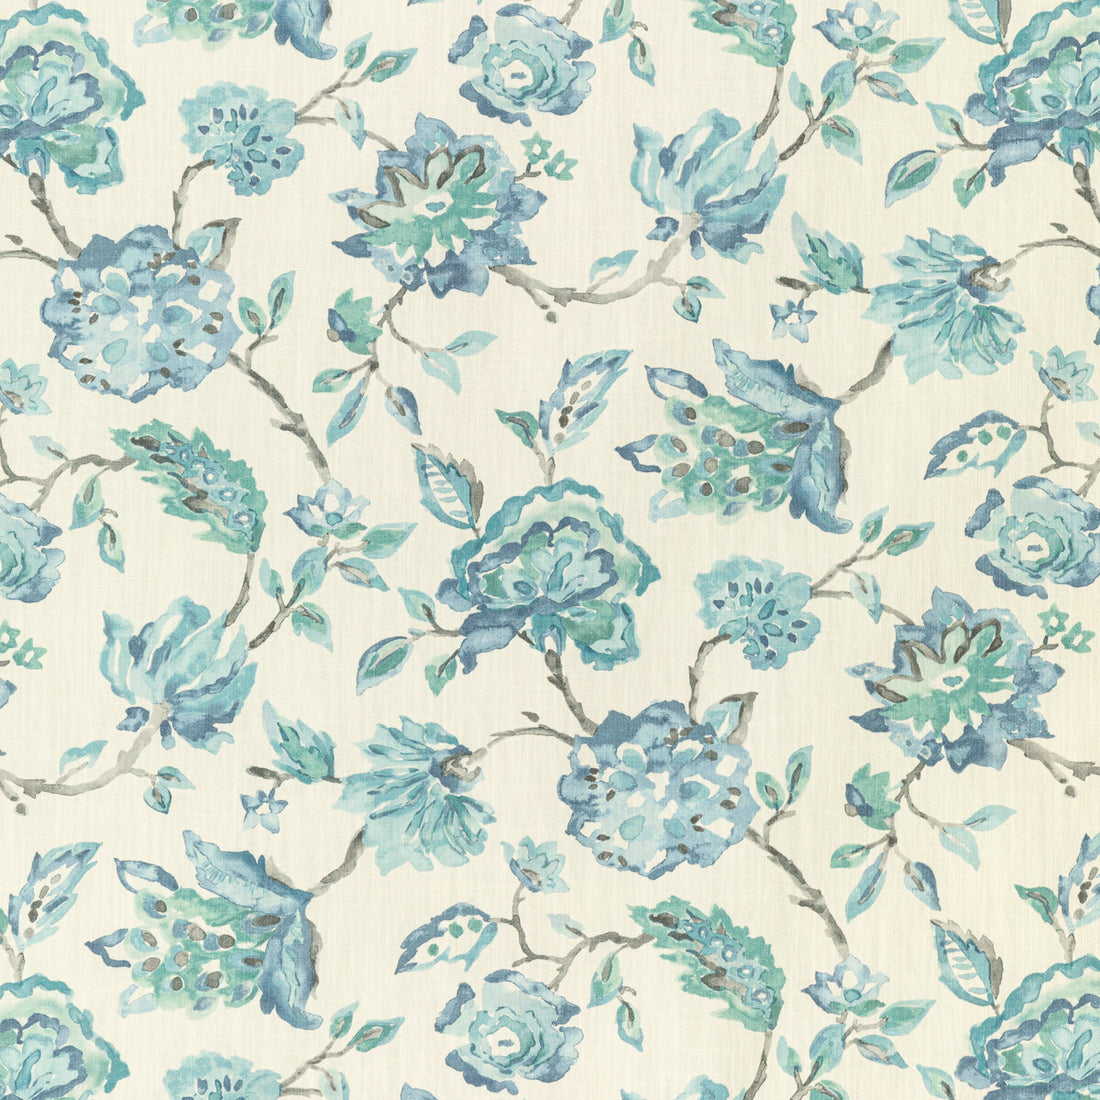 Etheria fabric in delphinium color - pattern ETHERIA.15.0 - by Kravet Basics in the Monterey collection